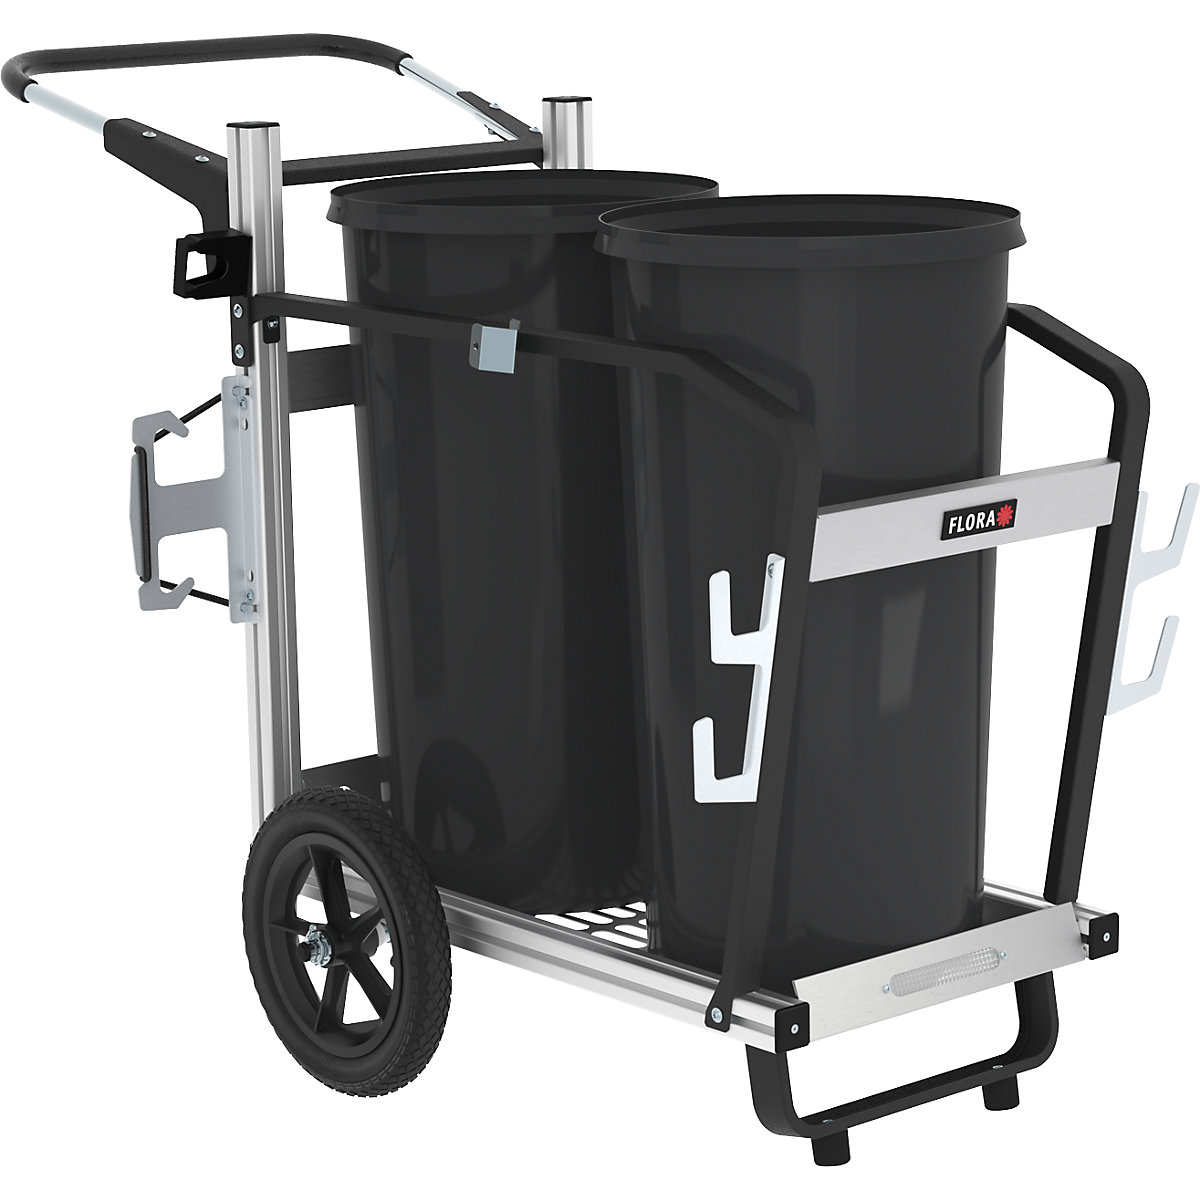 Easy Duo waste collection trolley – FLORA